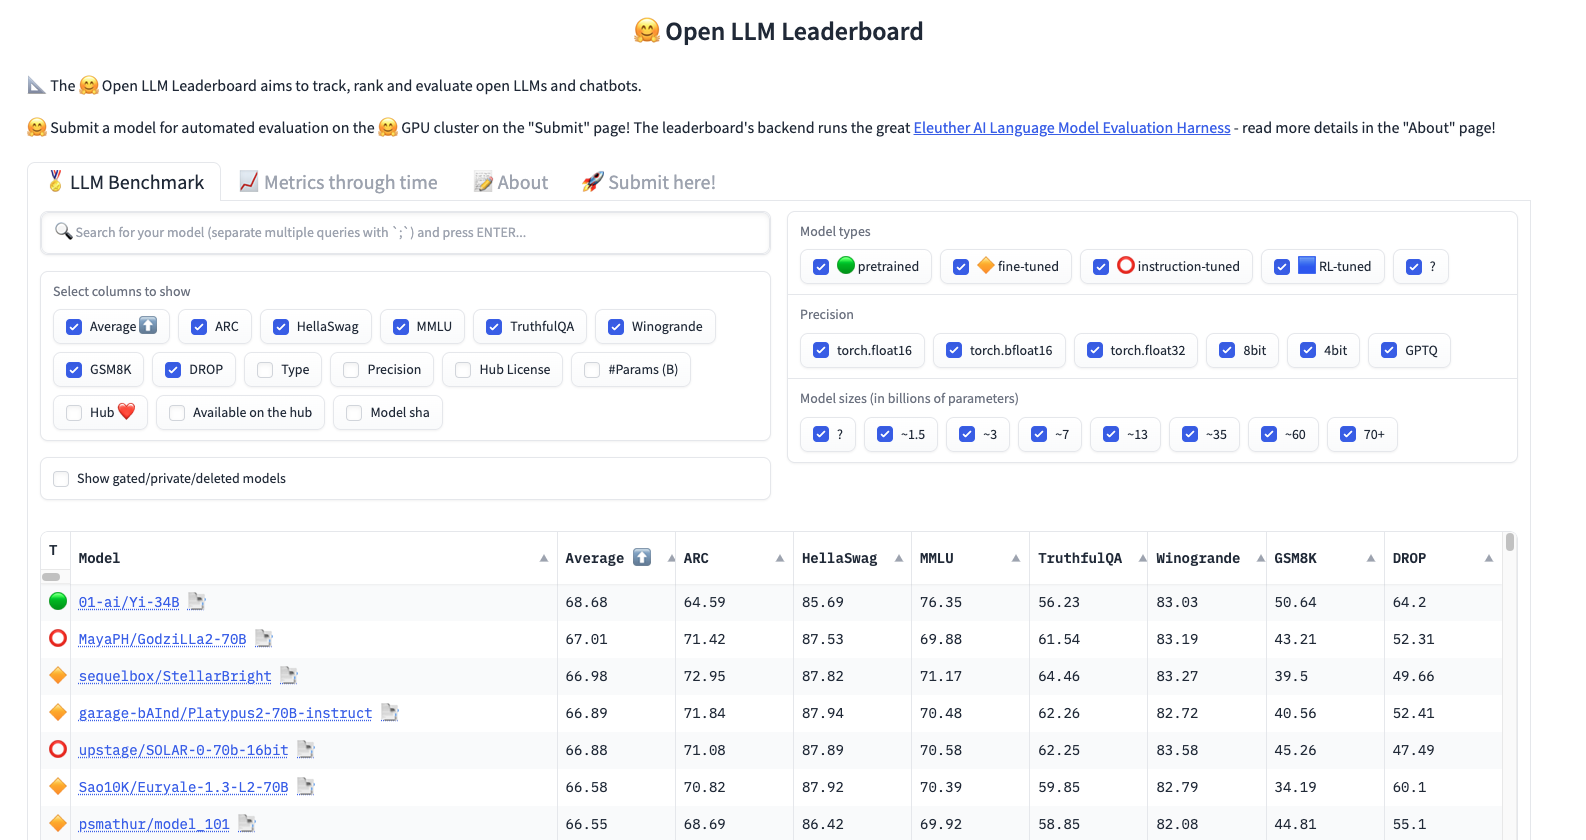 Comparing the best: A closer look at the top 5 open-source LLMs